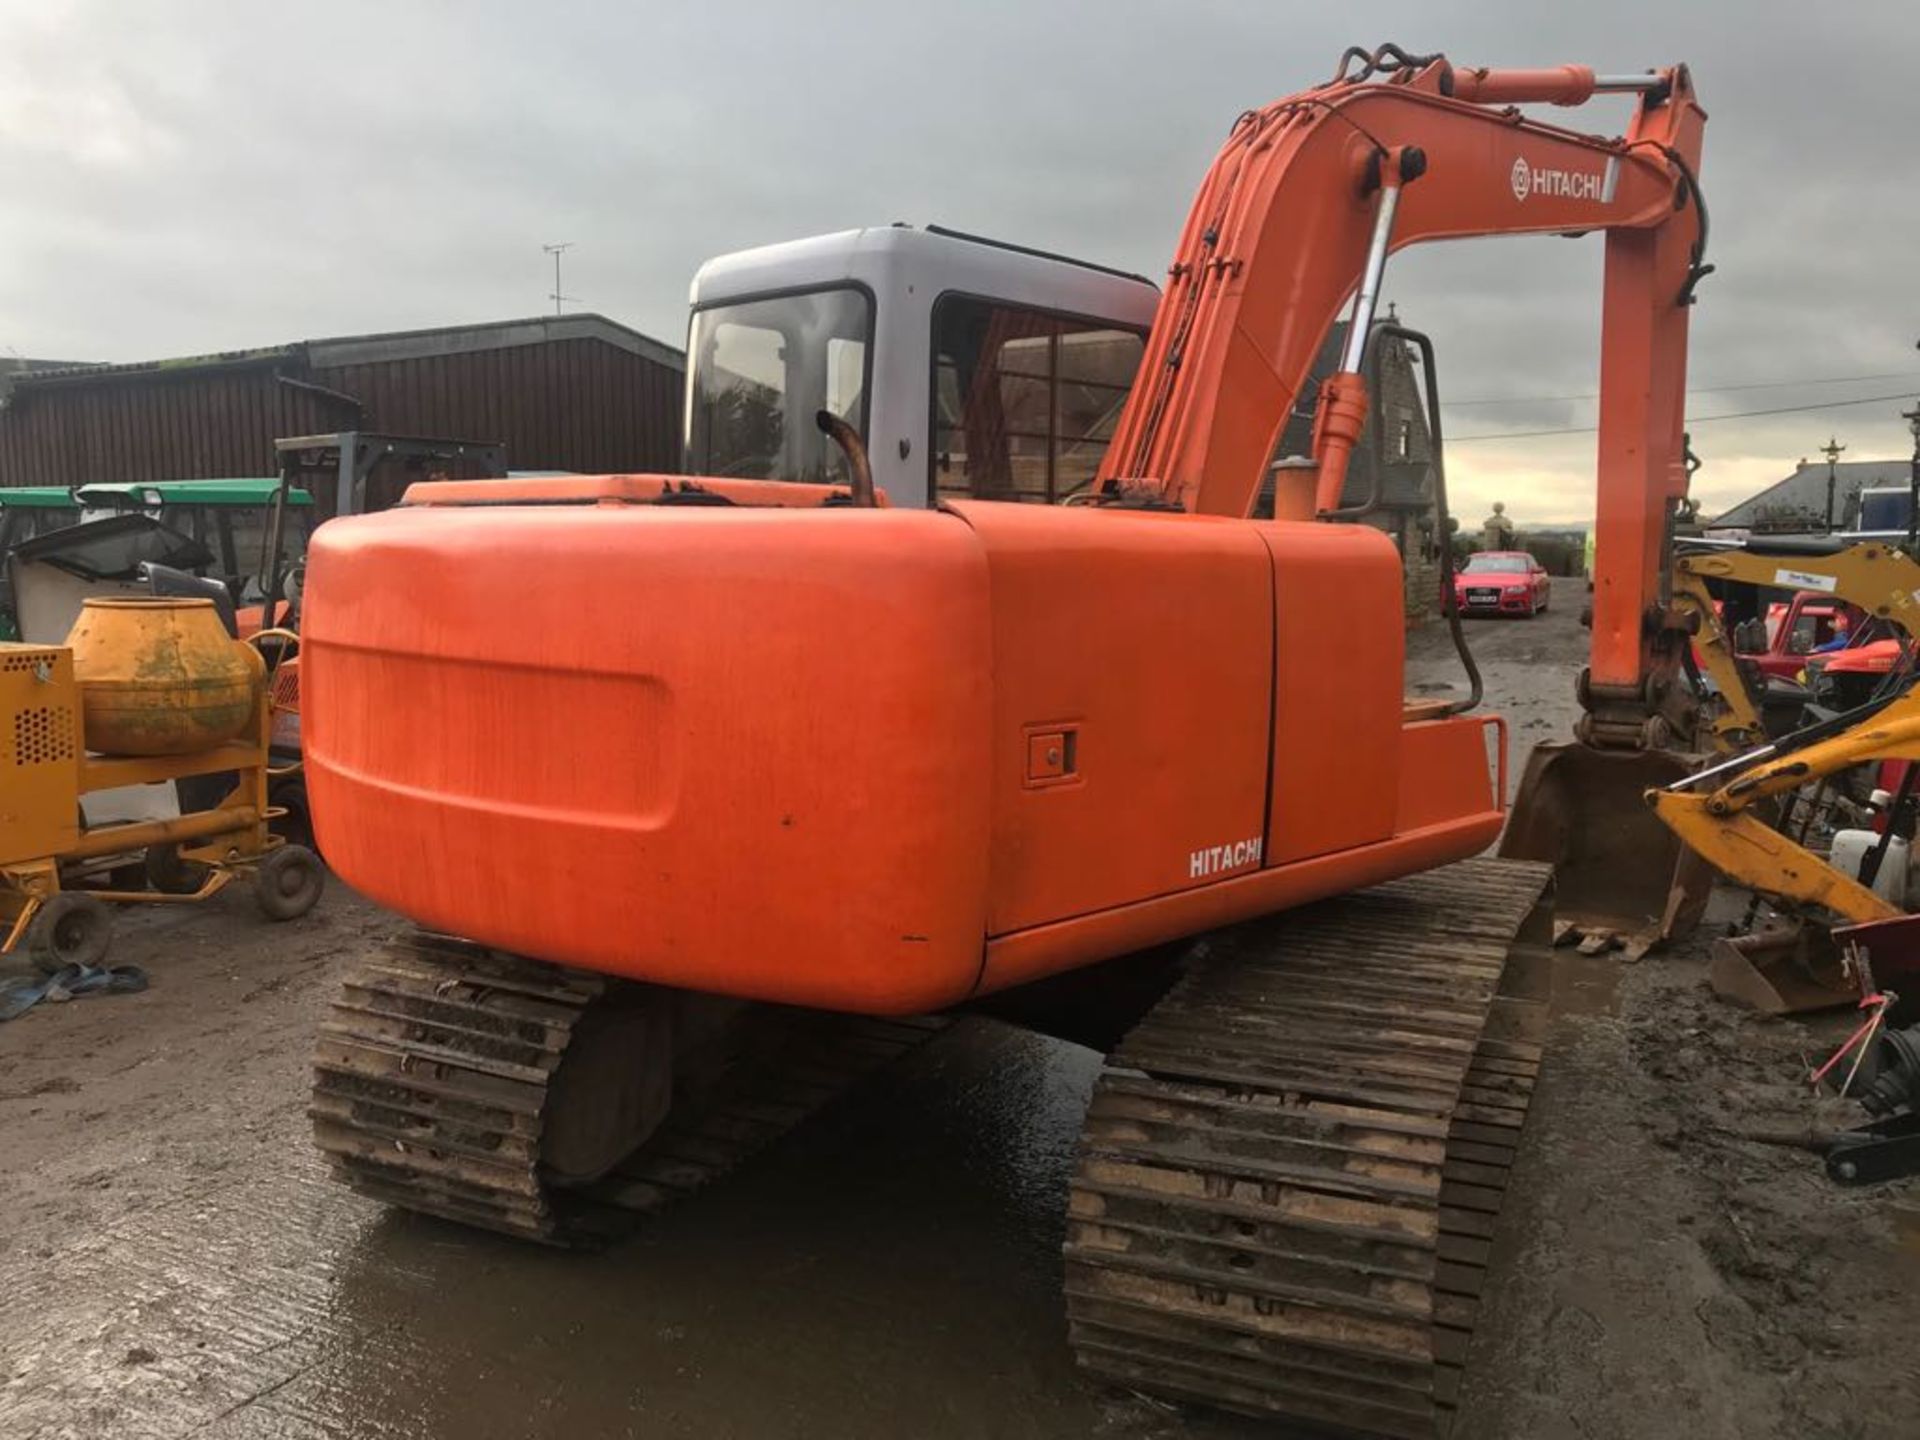 10 TONNE HITACHI DIGGER / EXCAVATOR, ALL GOOD AND WORKING, CLEAN & TIDY, SHOWING 6,021 HOURS - Image 2 of 11